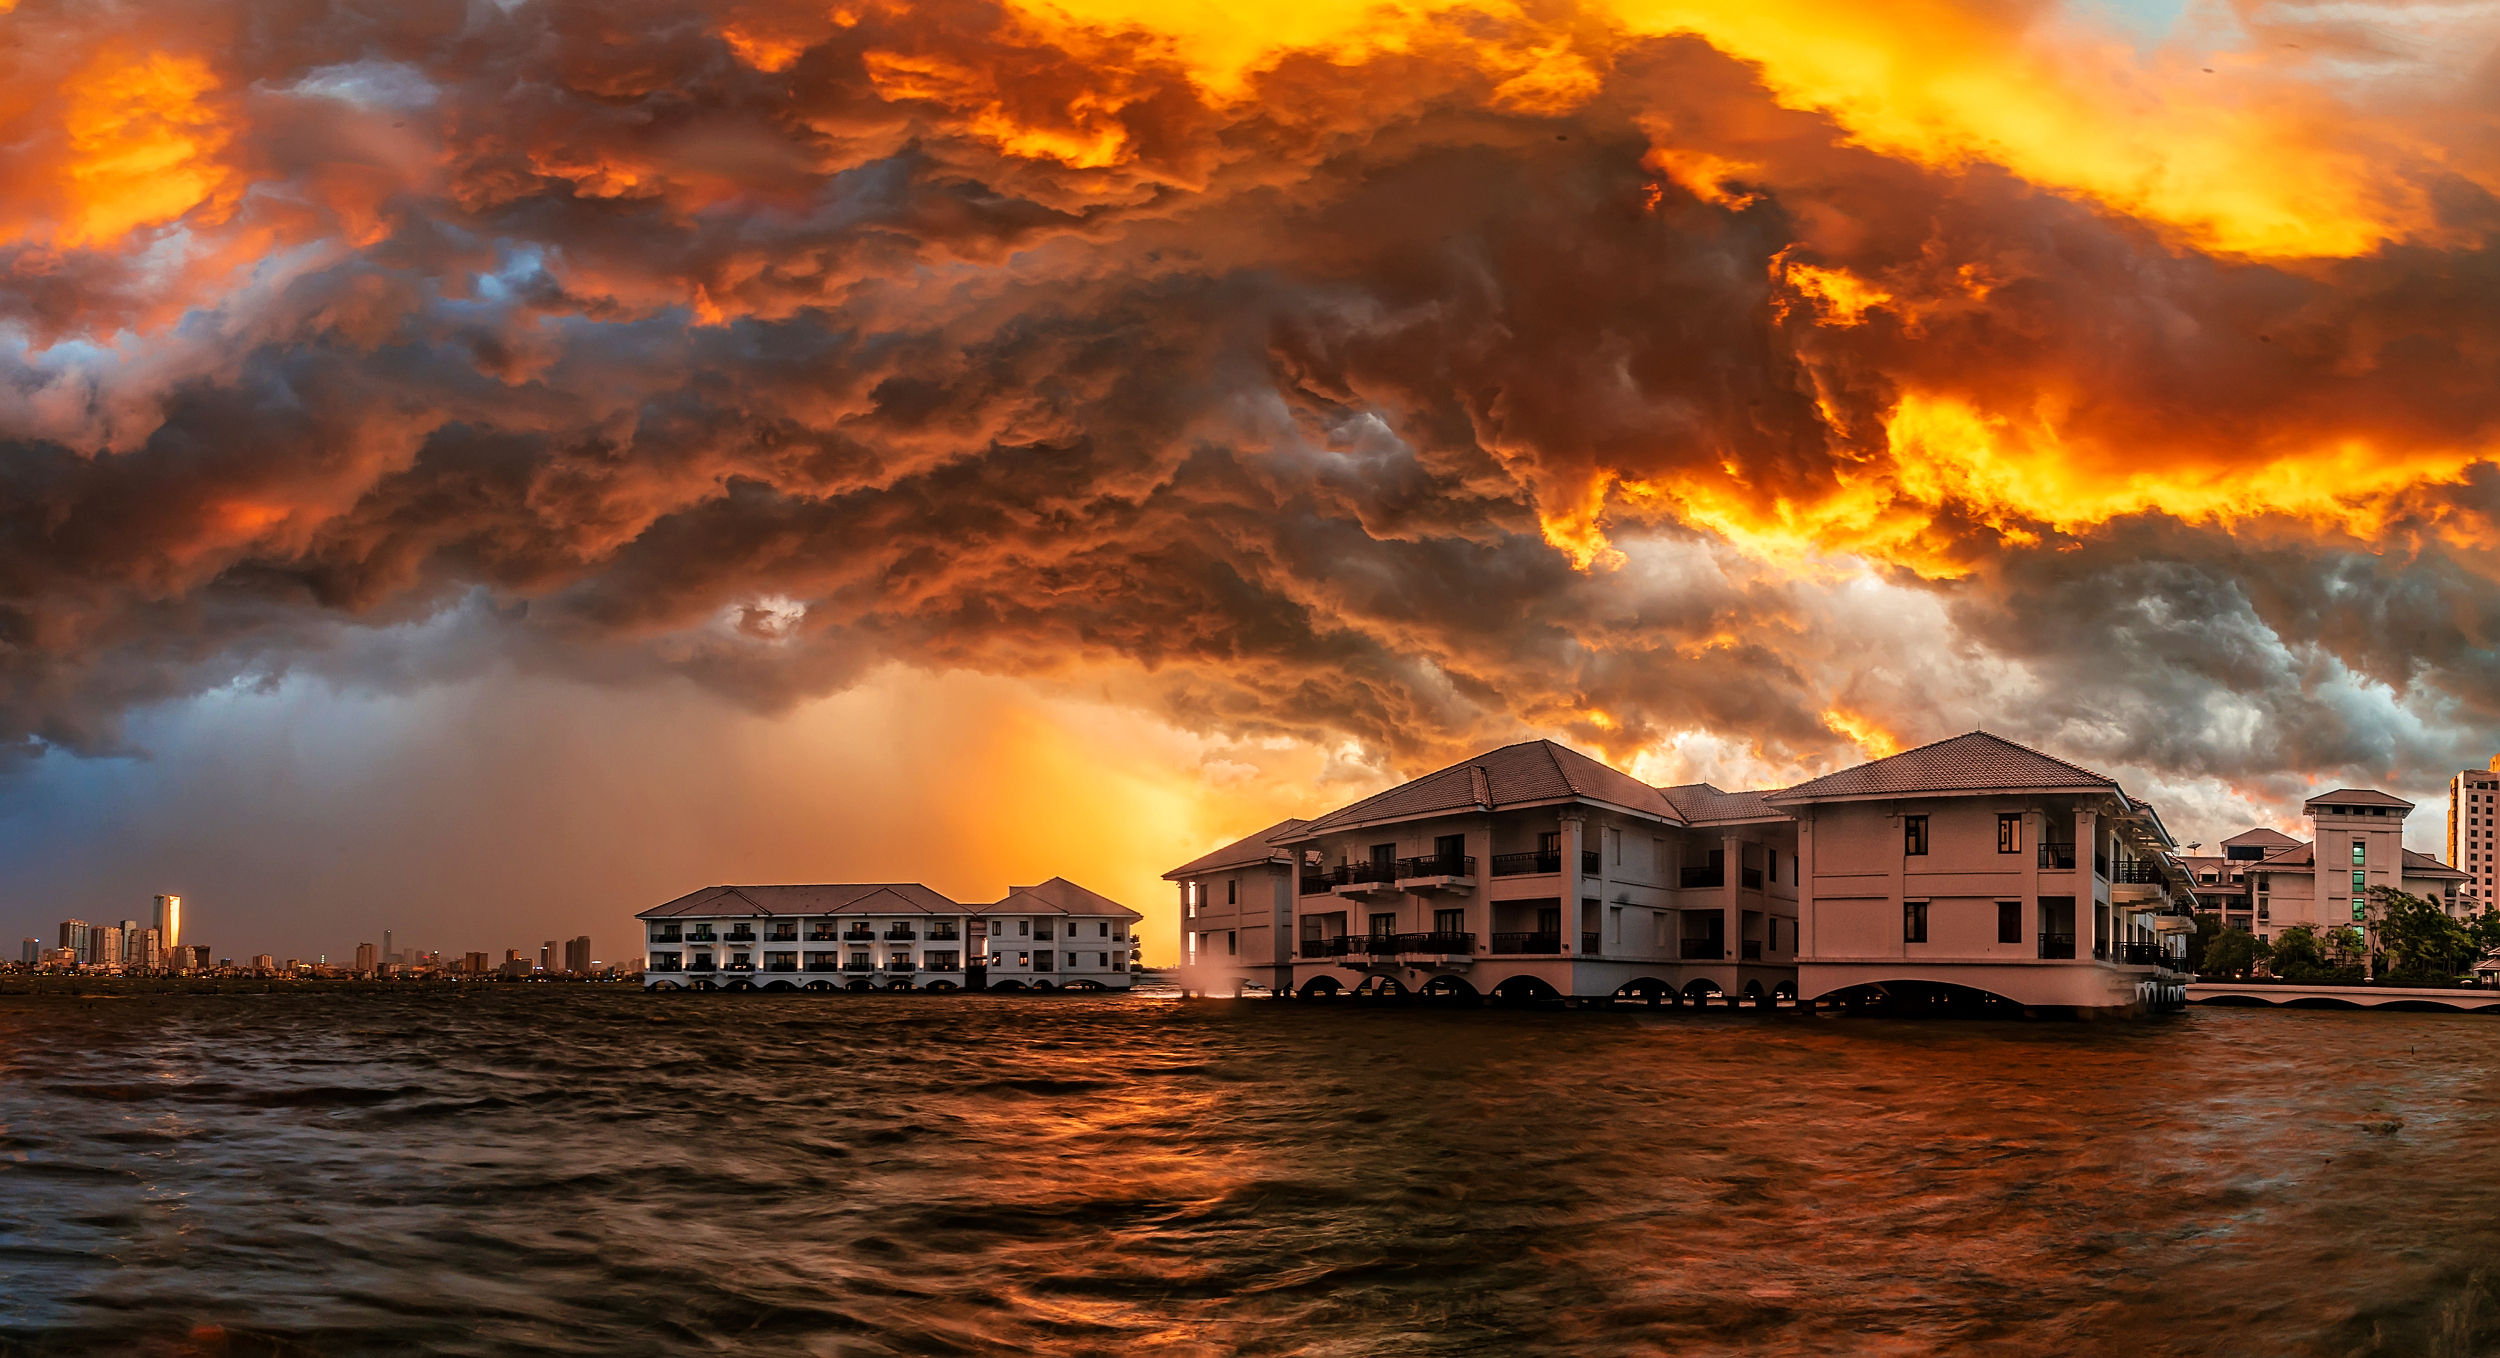 General 2500x1358 sunset storm sky clouds water urban photography HDR Sun city outdoors